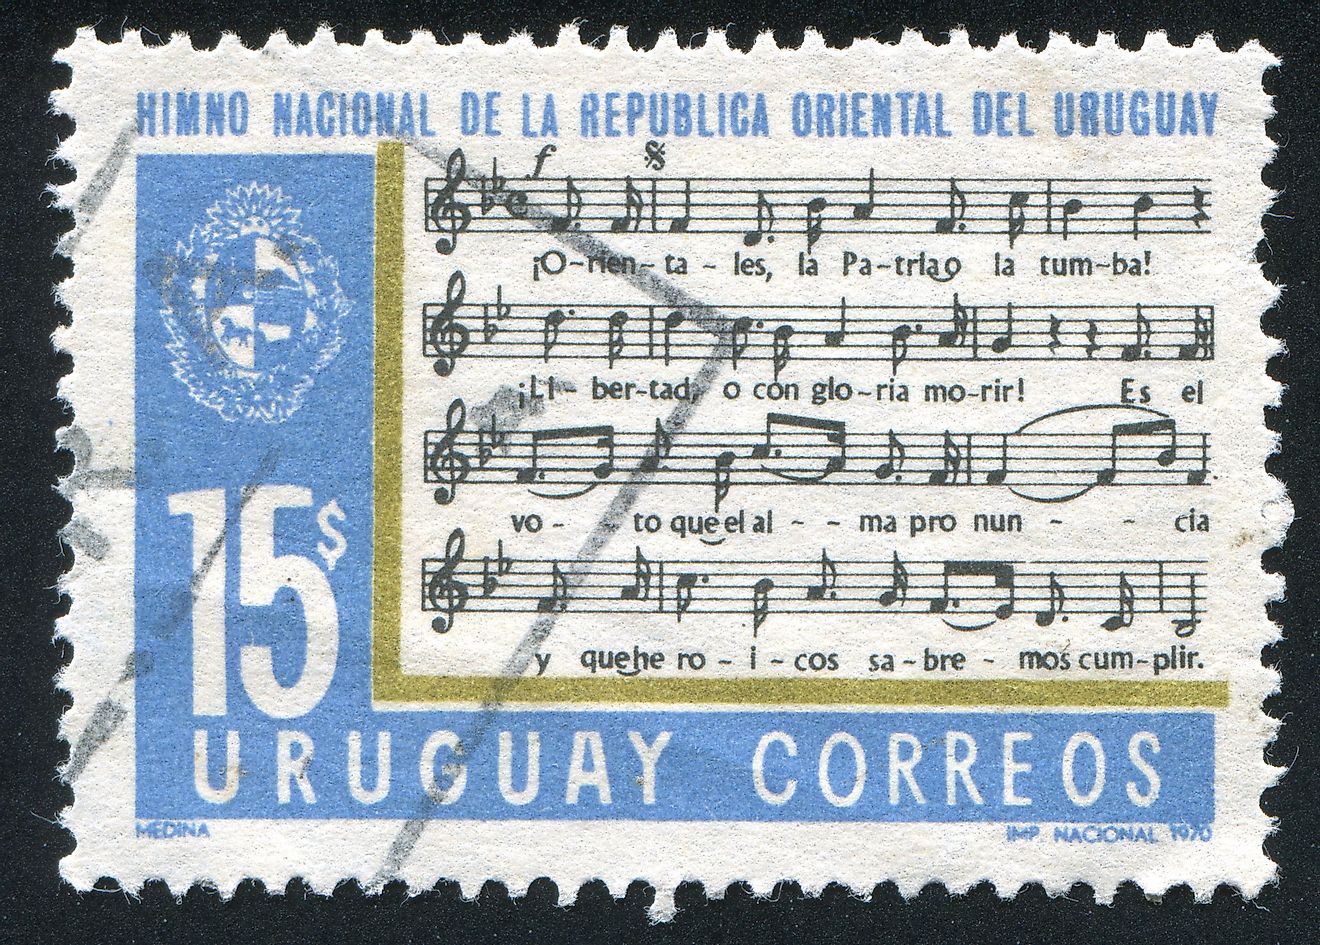 A stamp printing in Uruguay showing a section of the national anthem. Editorial credit: rook76 / Shutterstock.com.